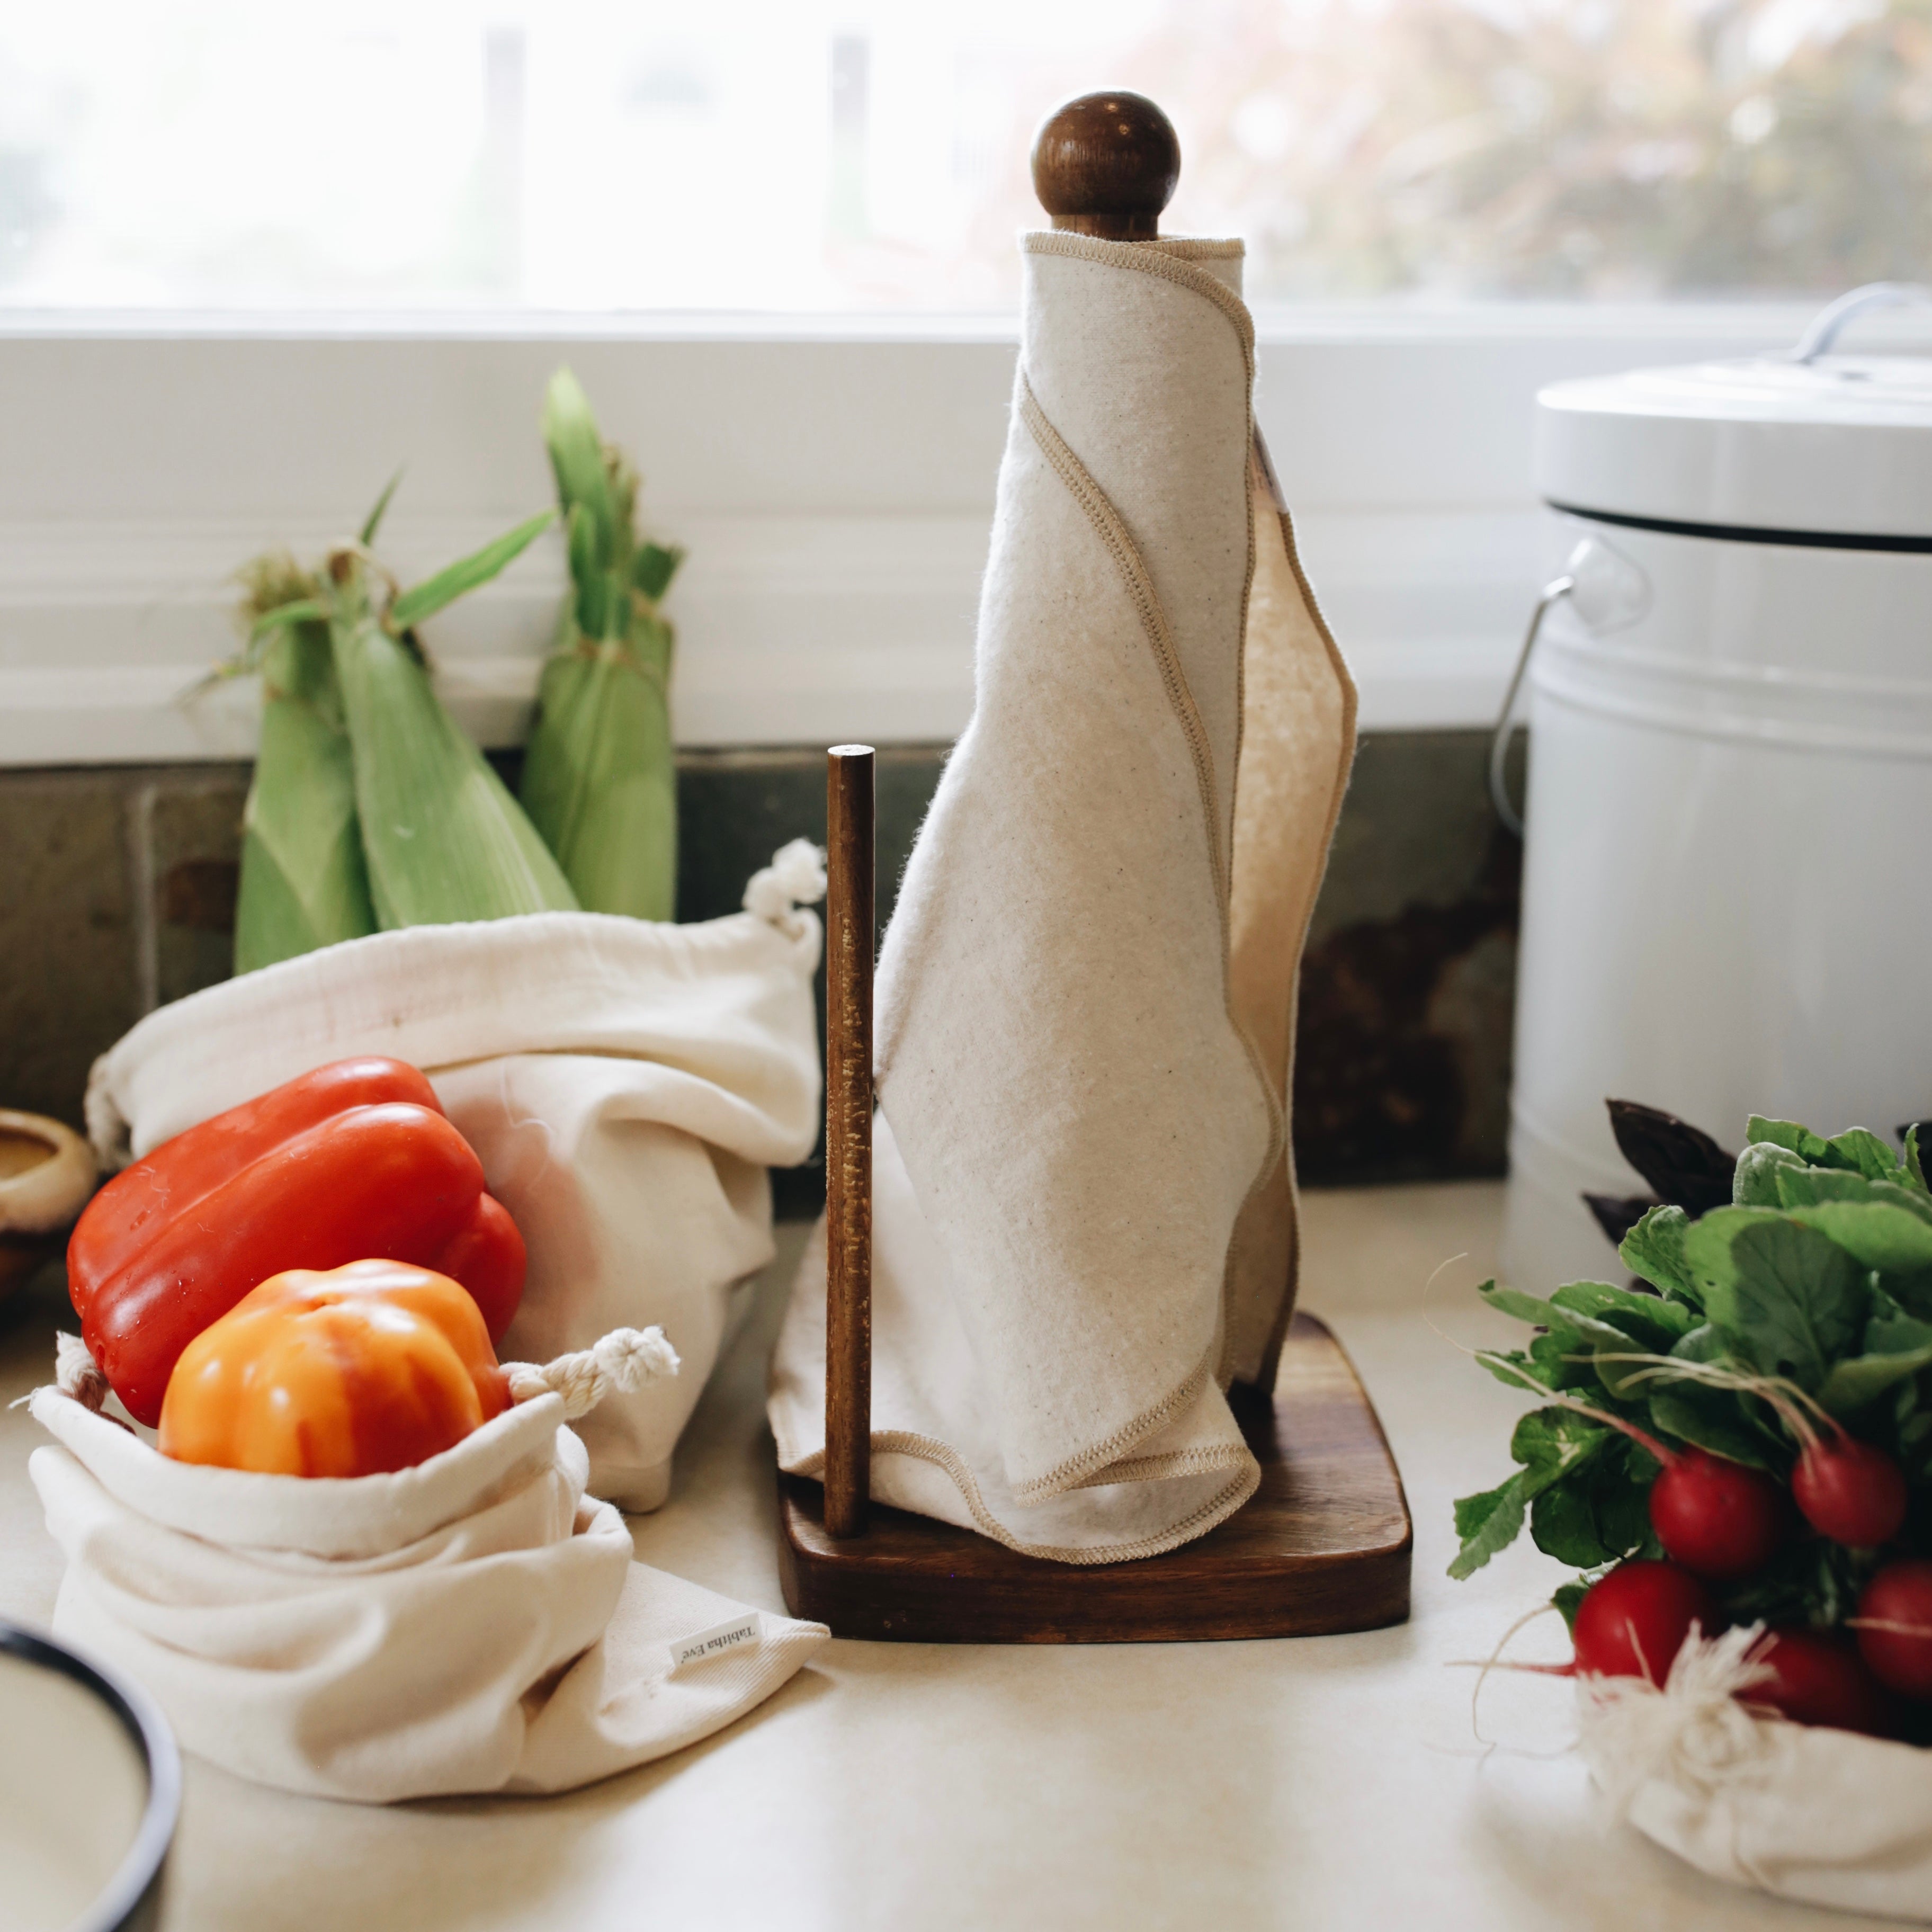 Paperless Towels & Napkins | The Caring Home